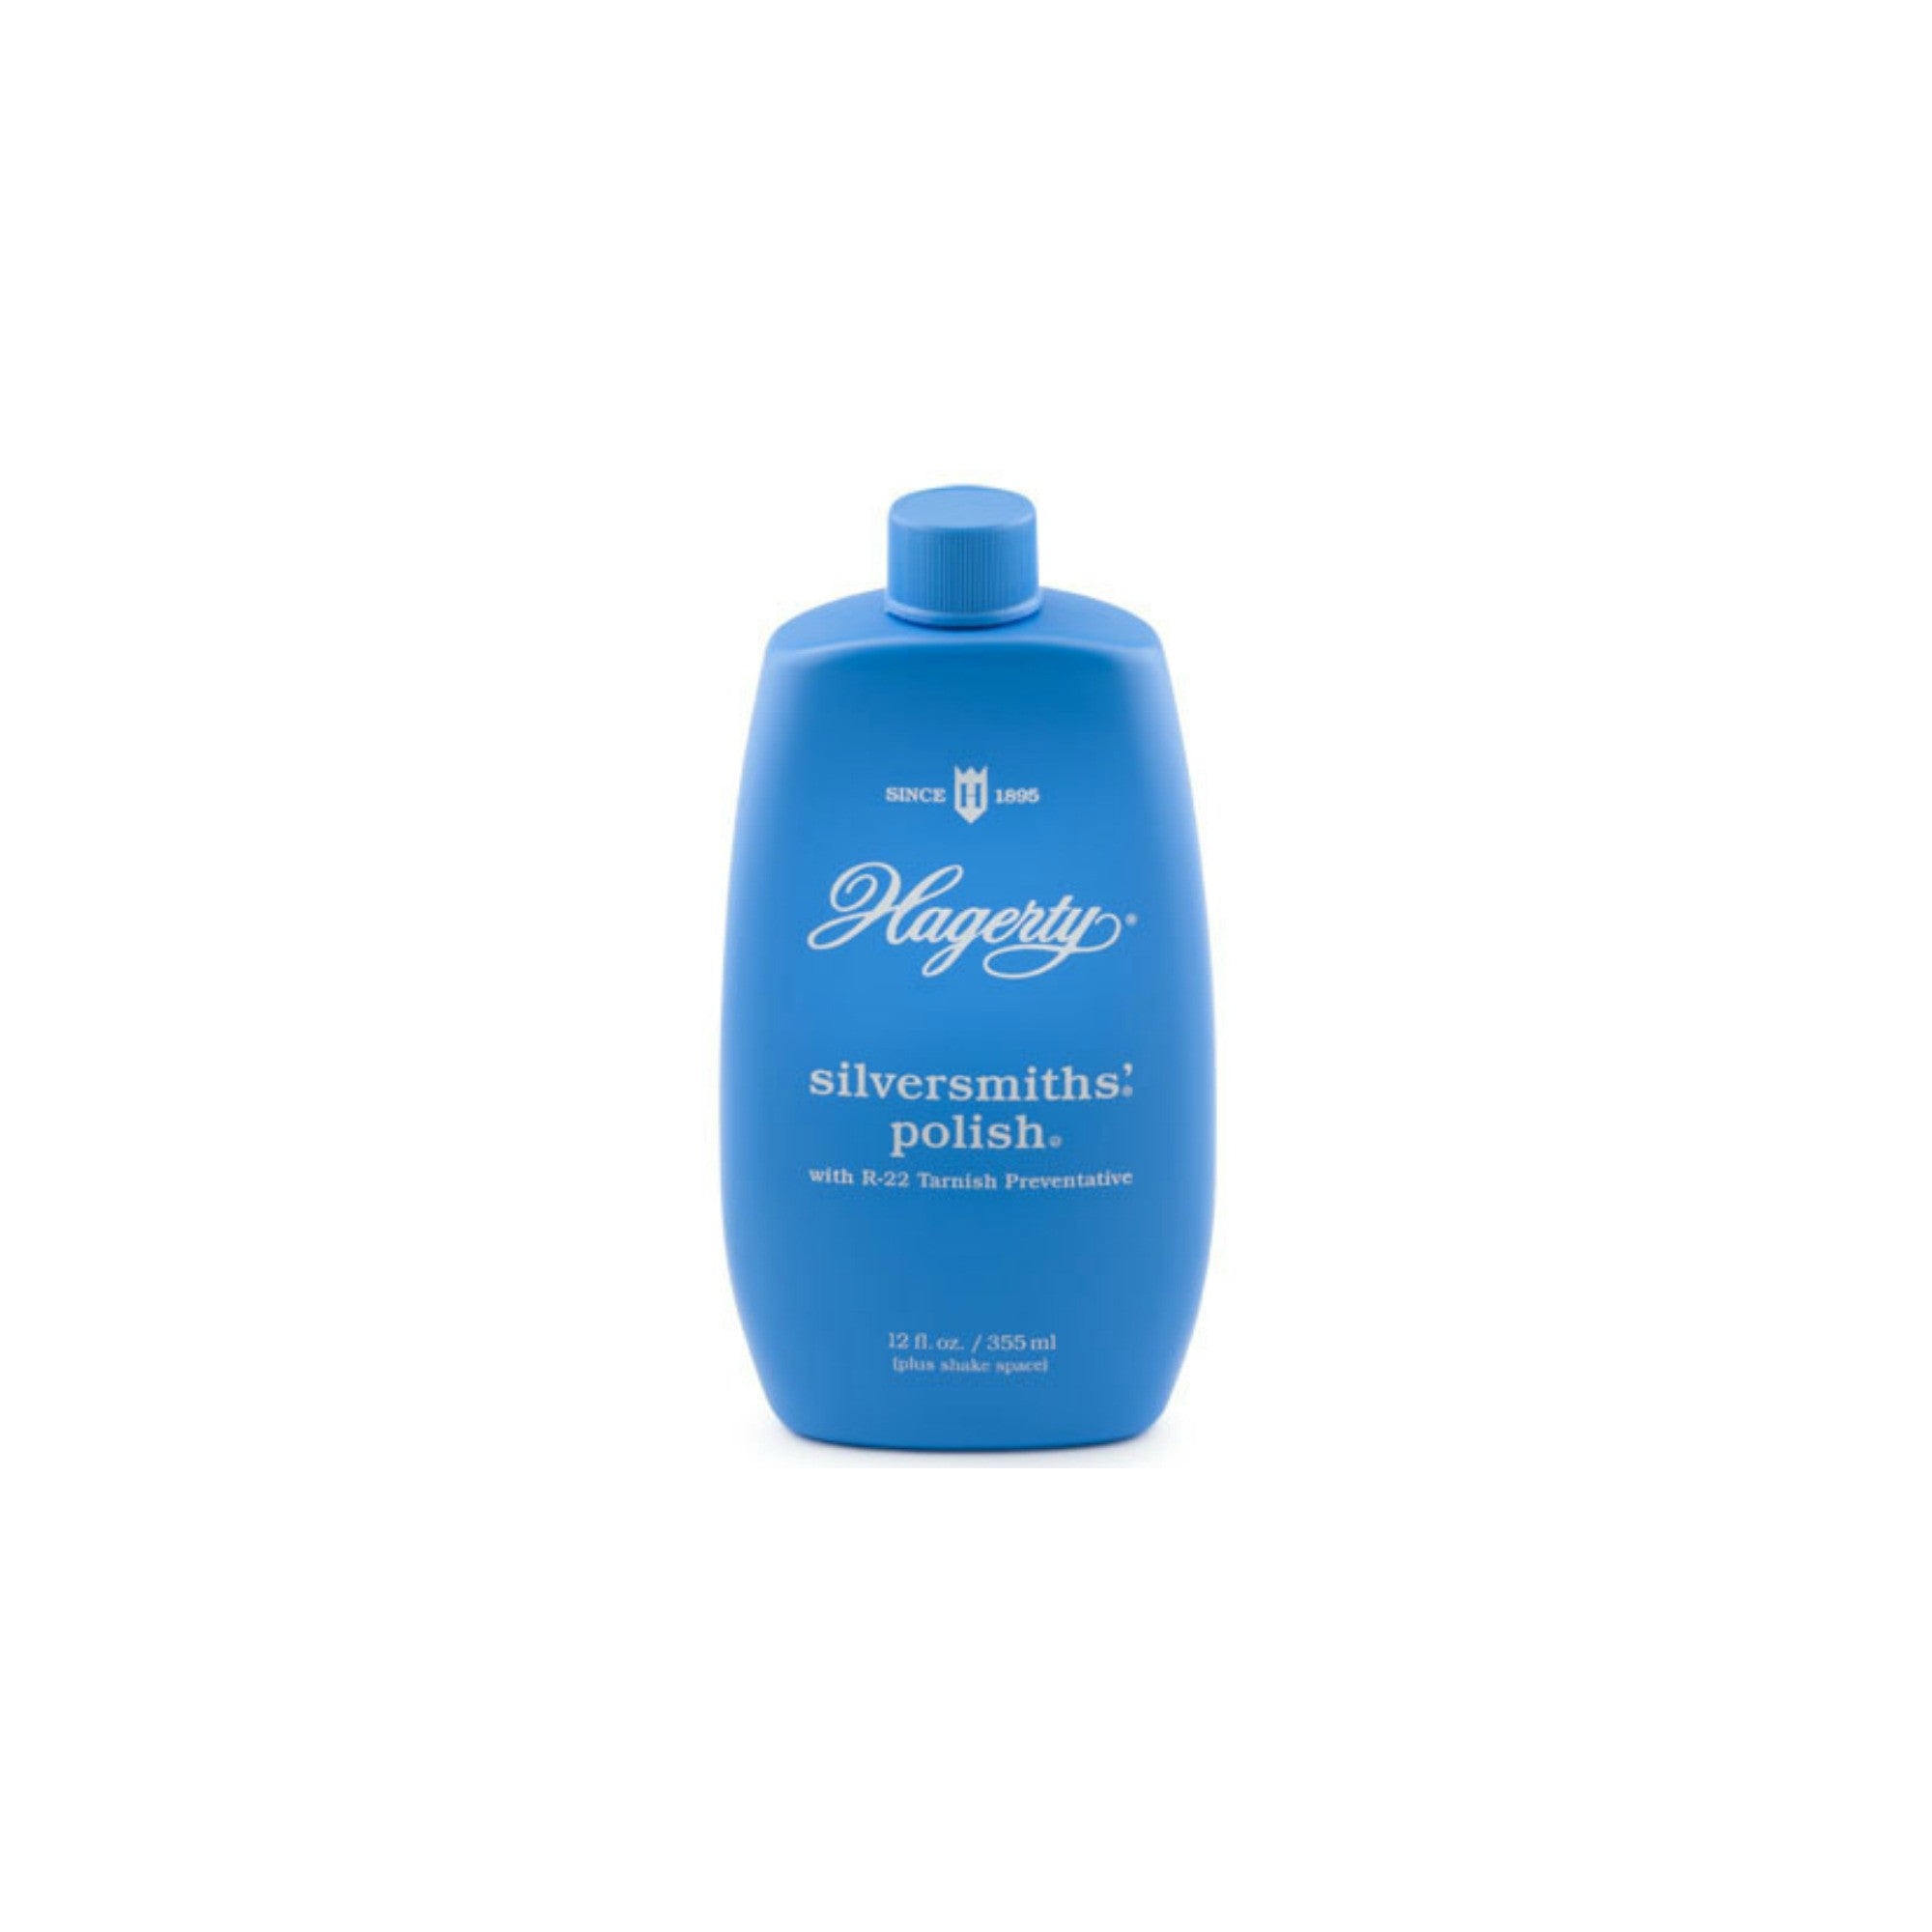 Hagerty silver polish cleaning and protecting lotion 250ml